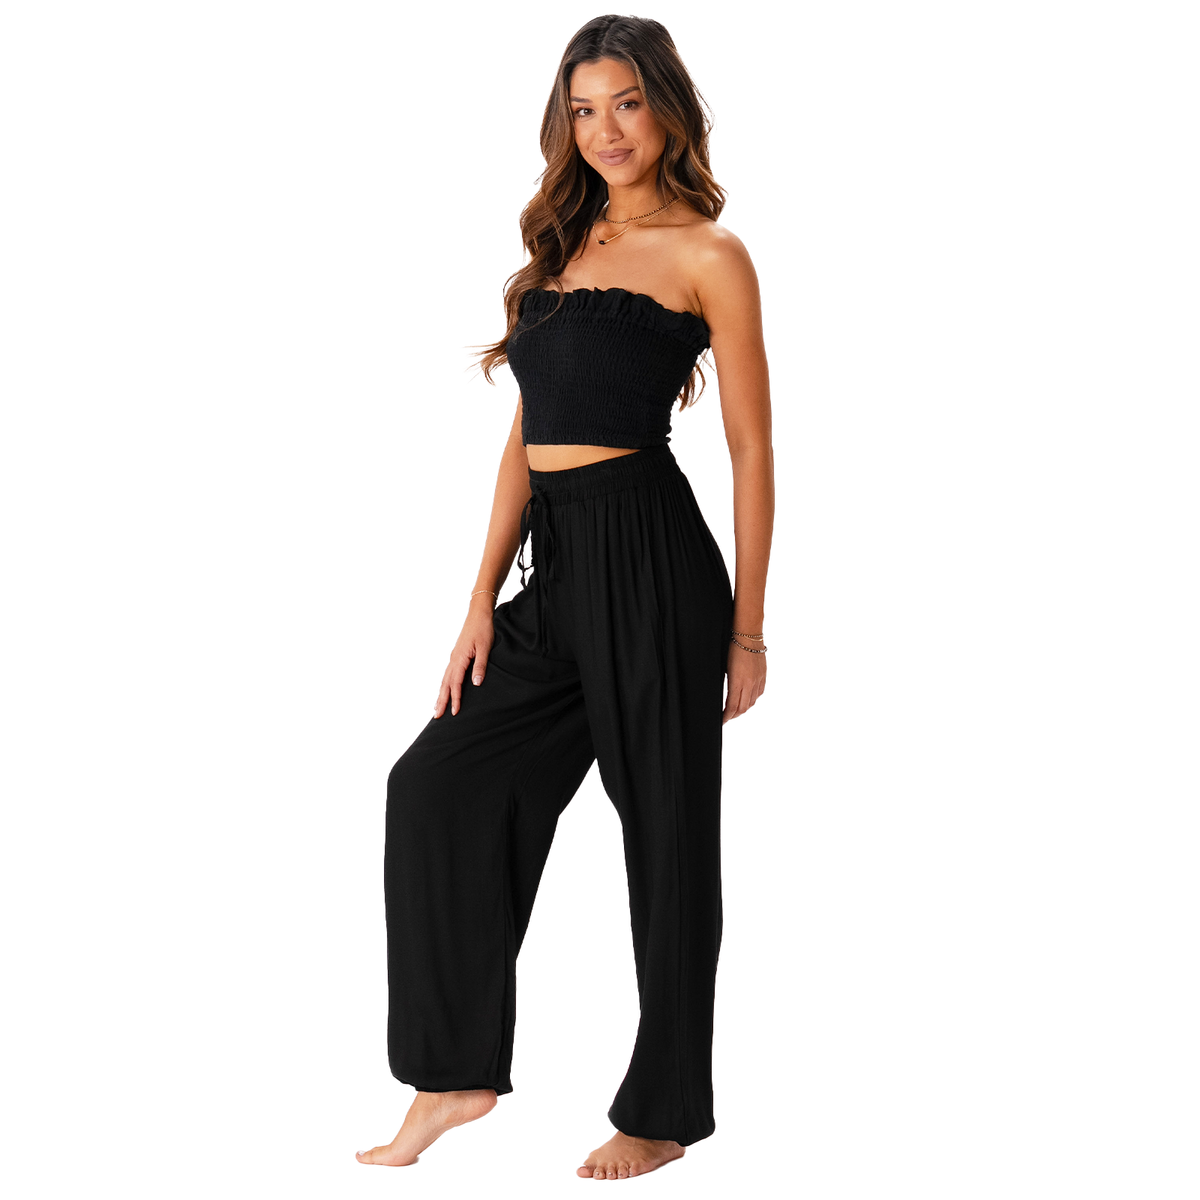 Model wearing black harem pants with a drawstring waistband with a black smocked tube top